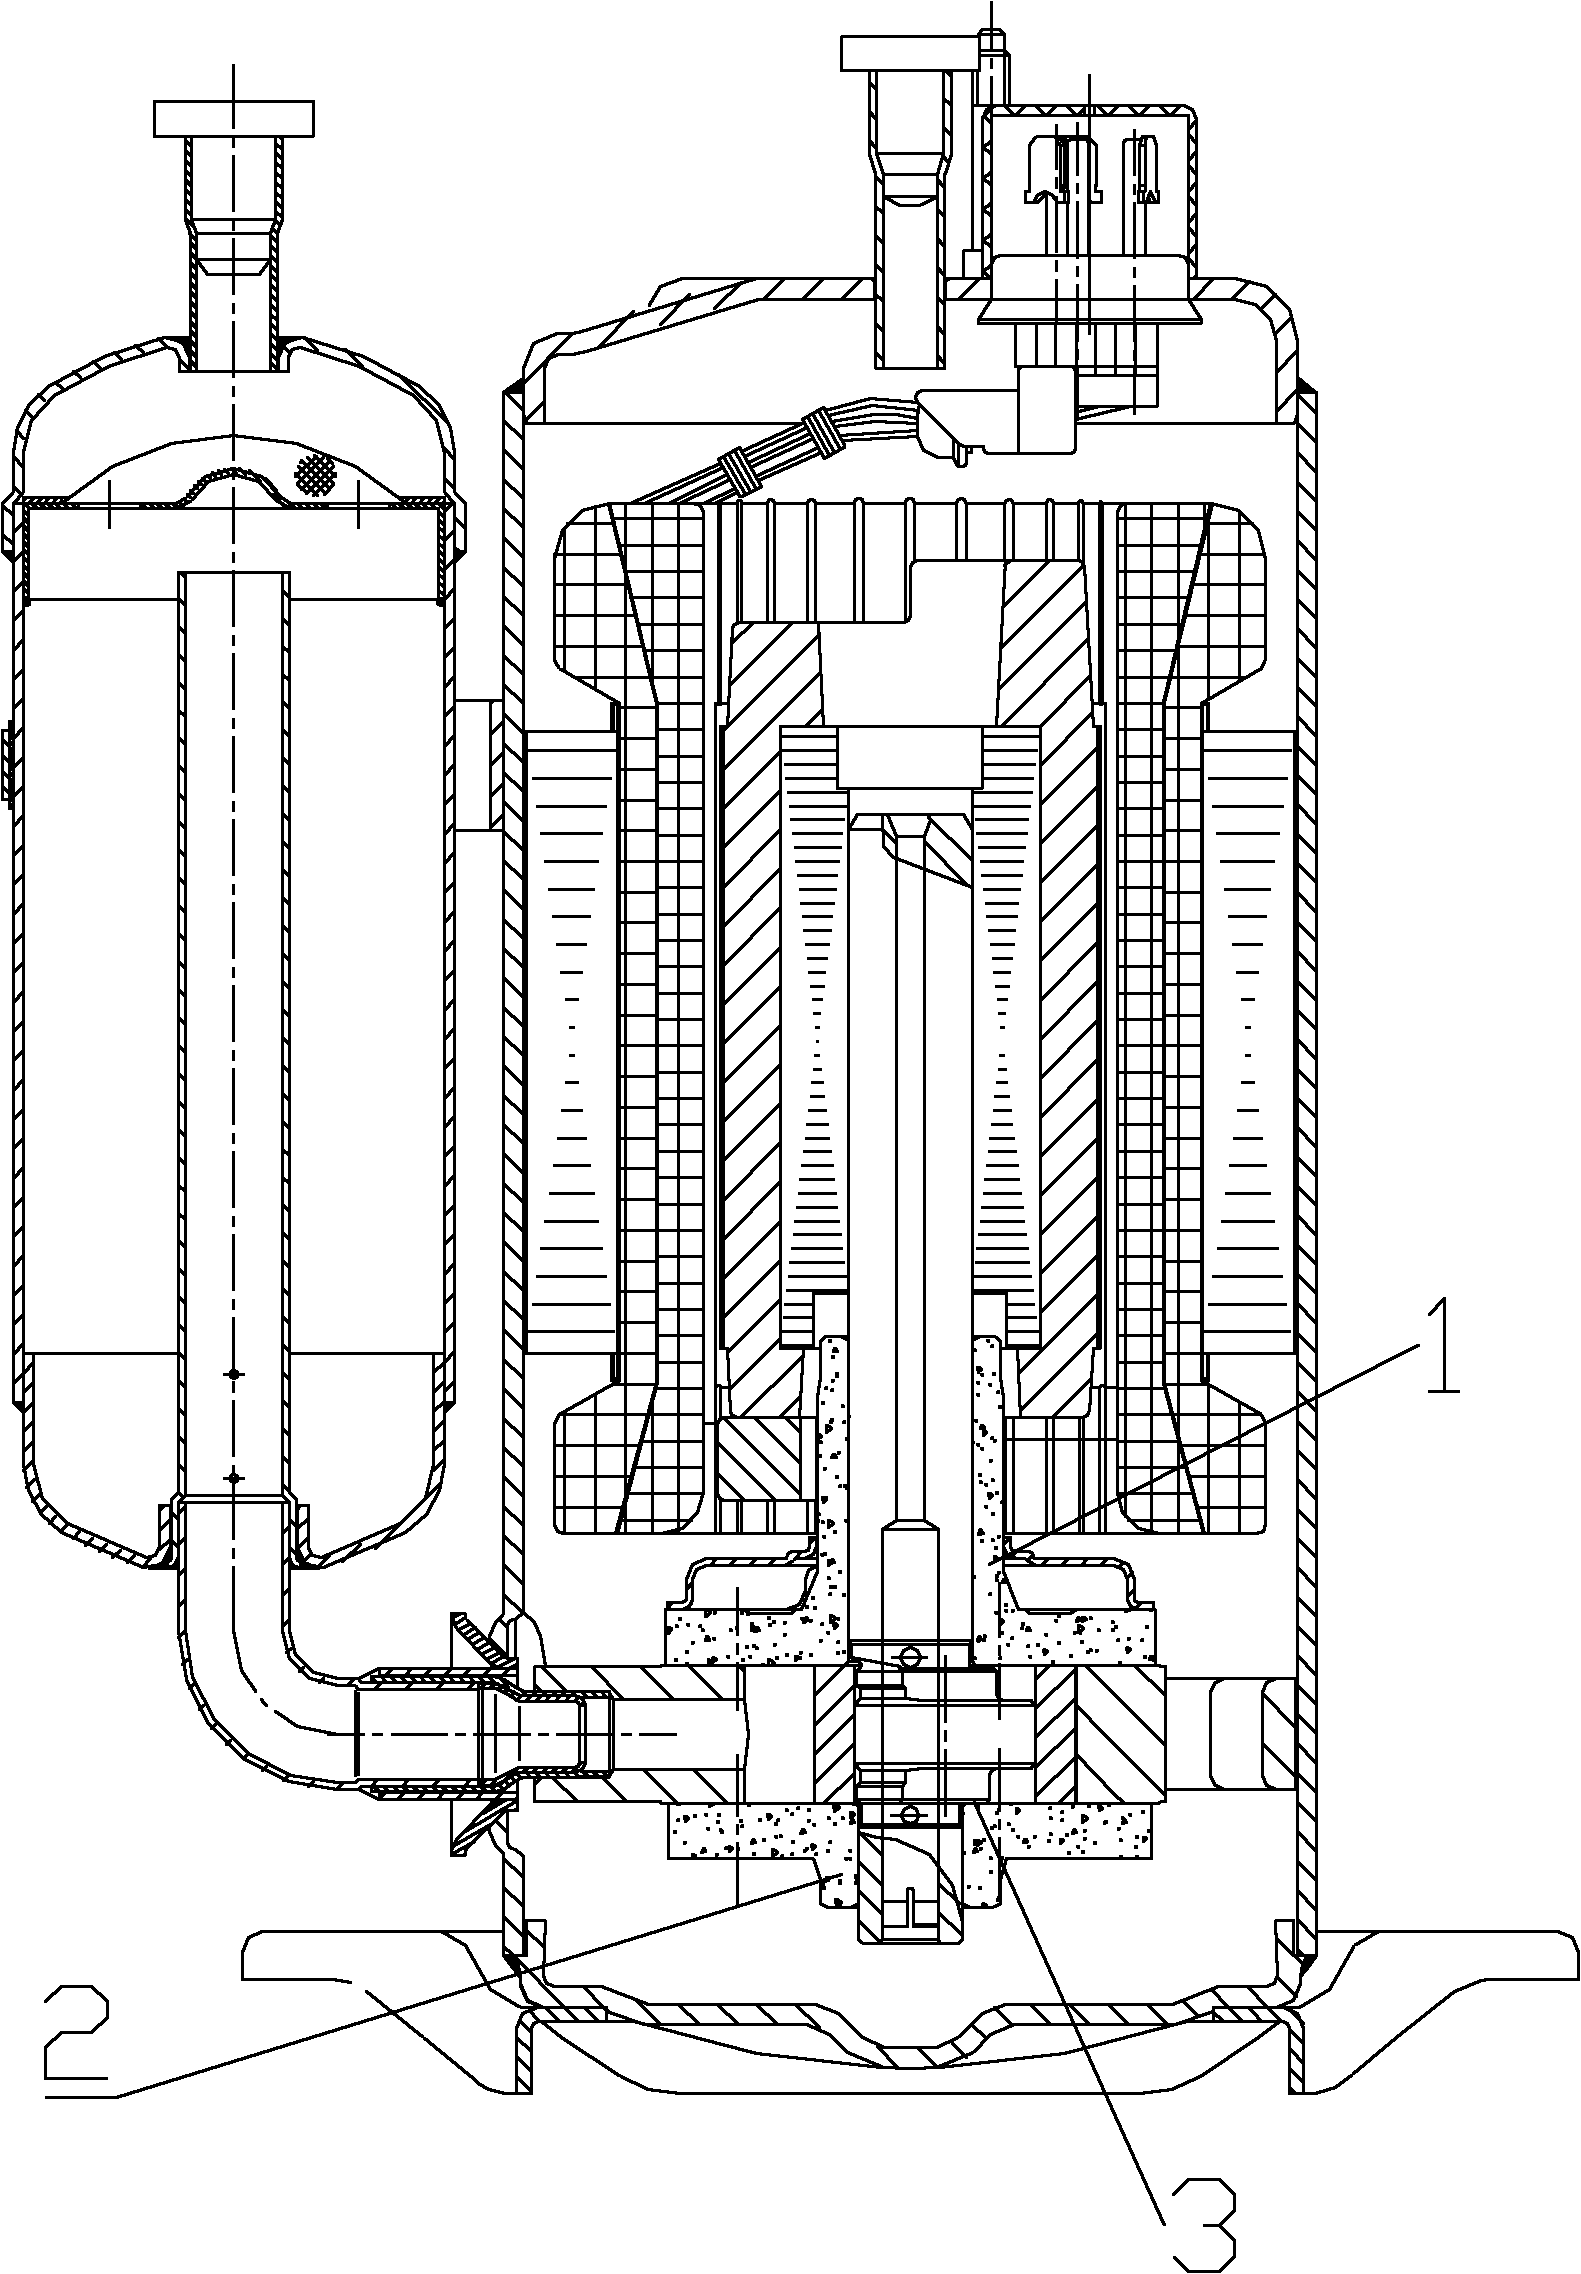 Rotary supporting lubrication structure of rotary type compressor